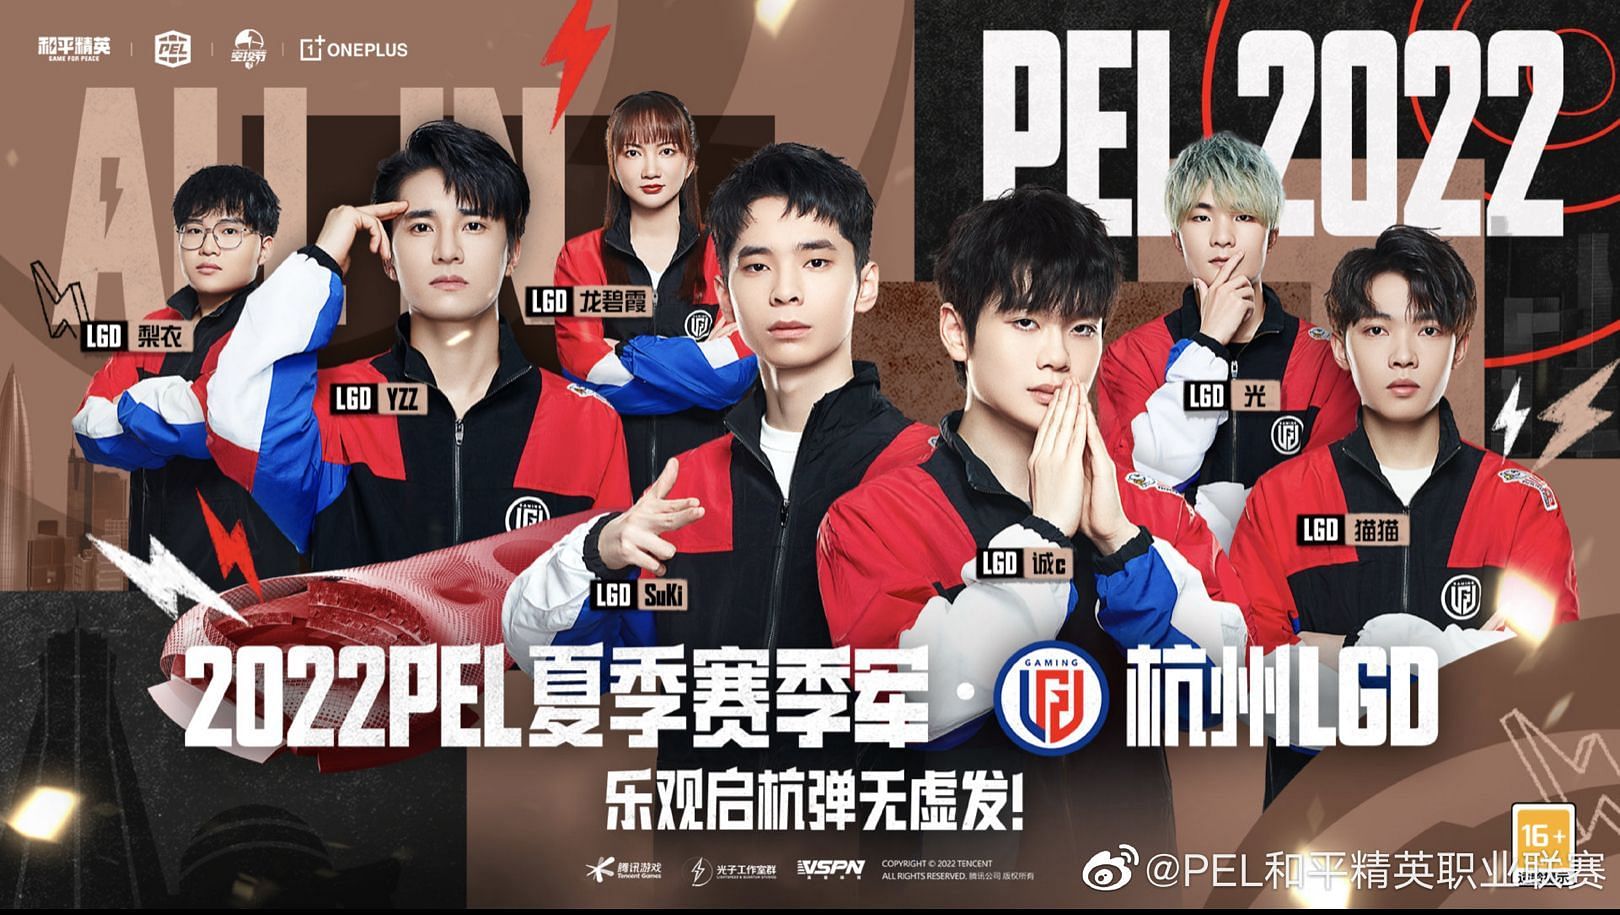 LGD Gaming finished third in PEL Summer 2022 (Image via Tencent)